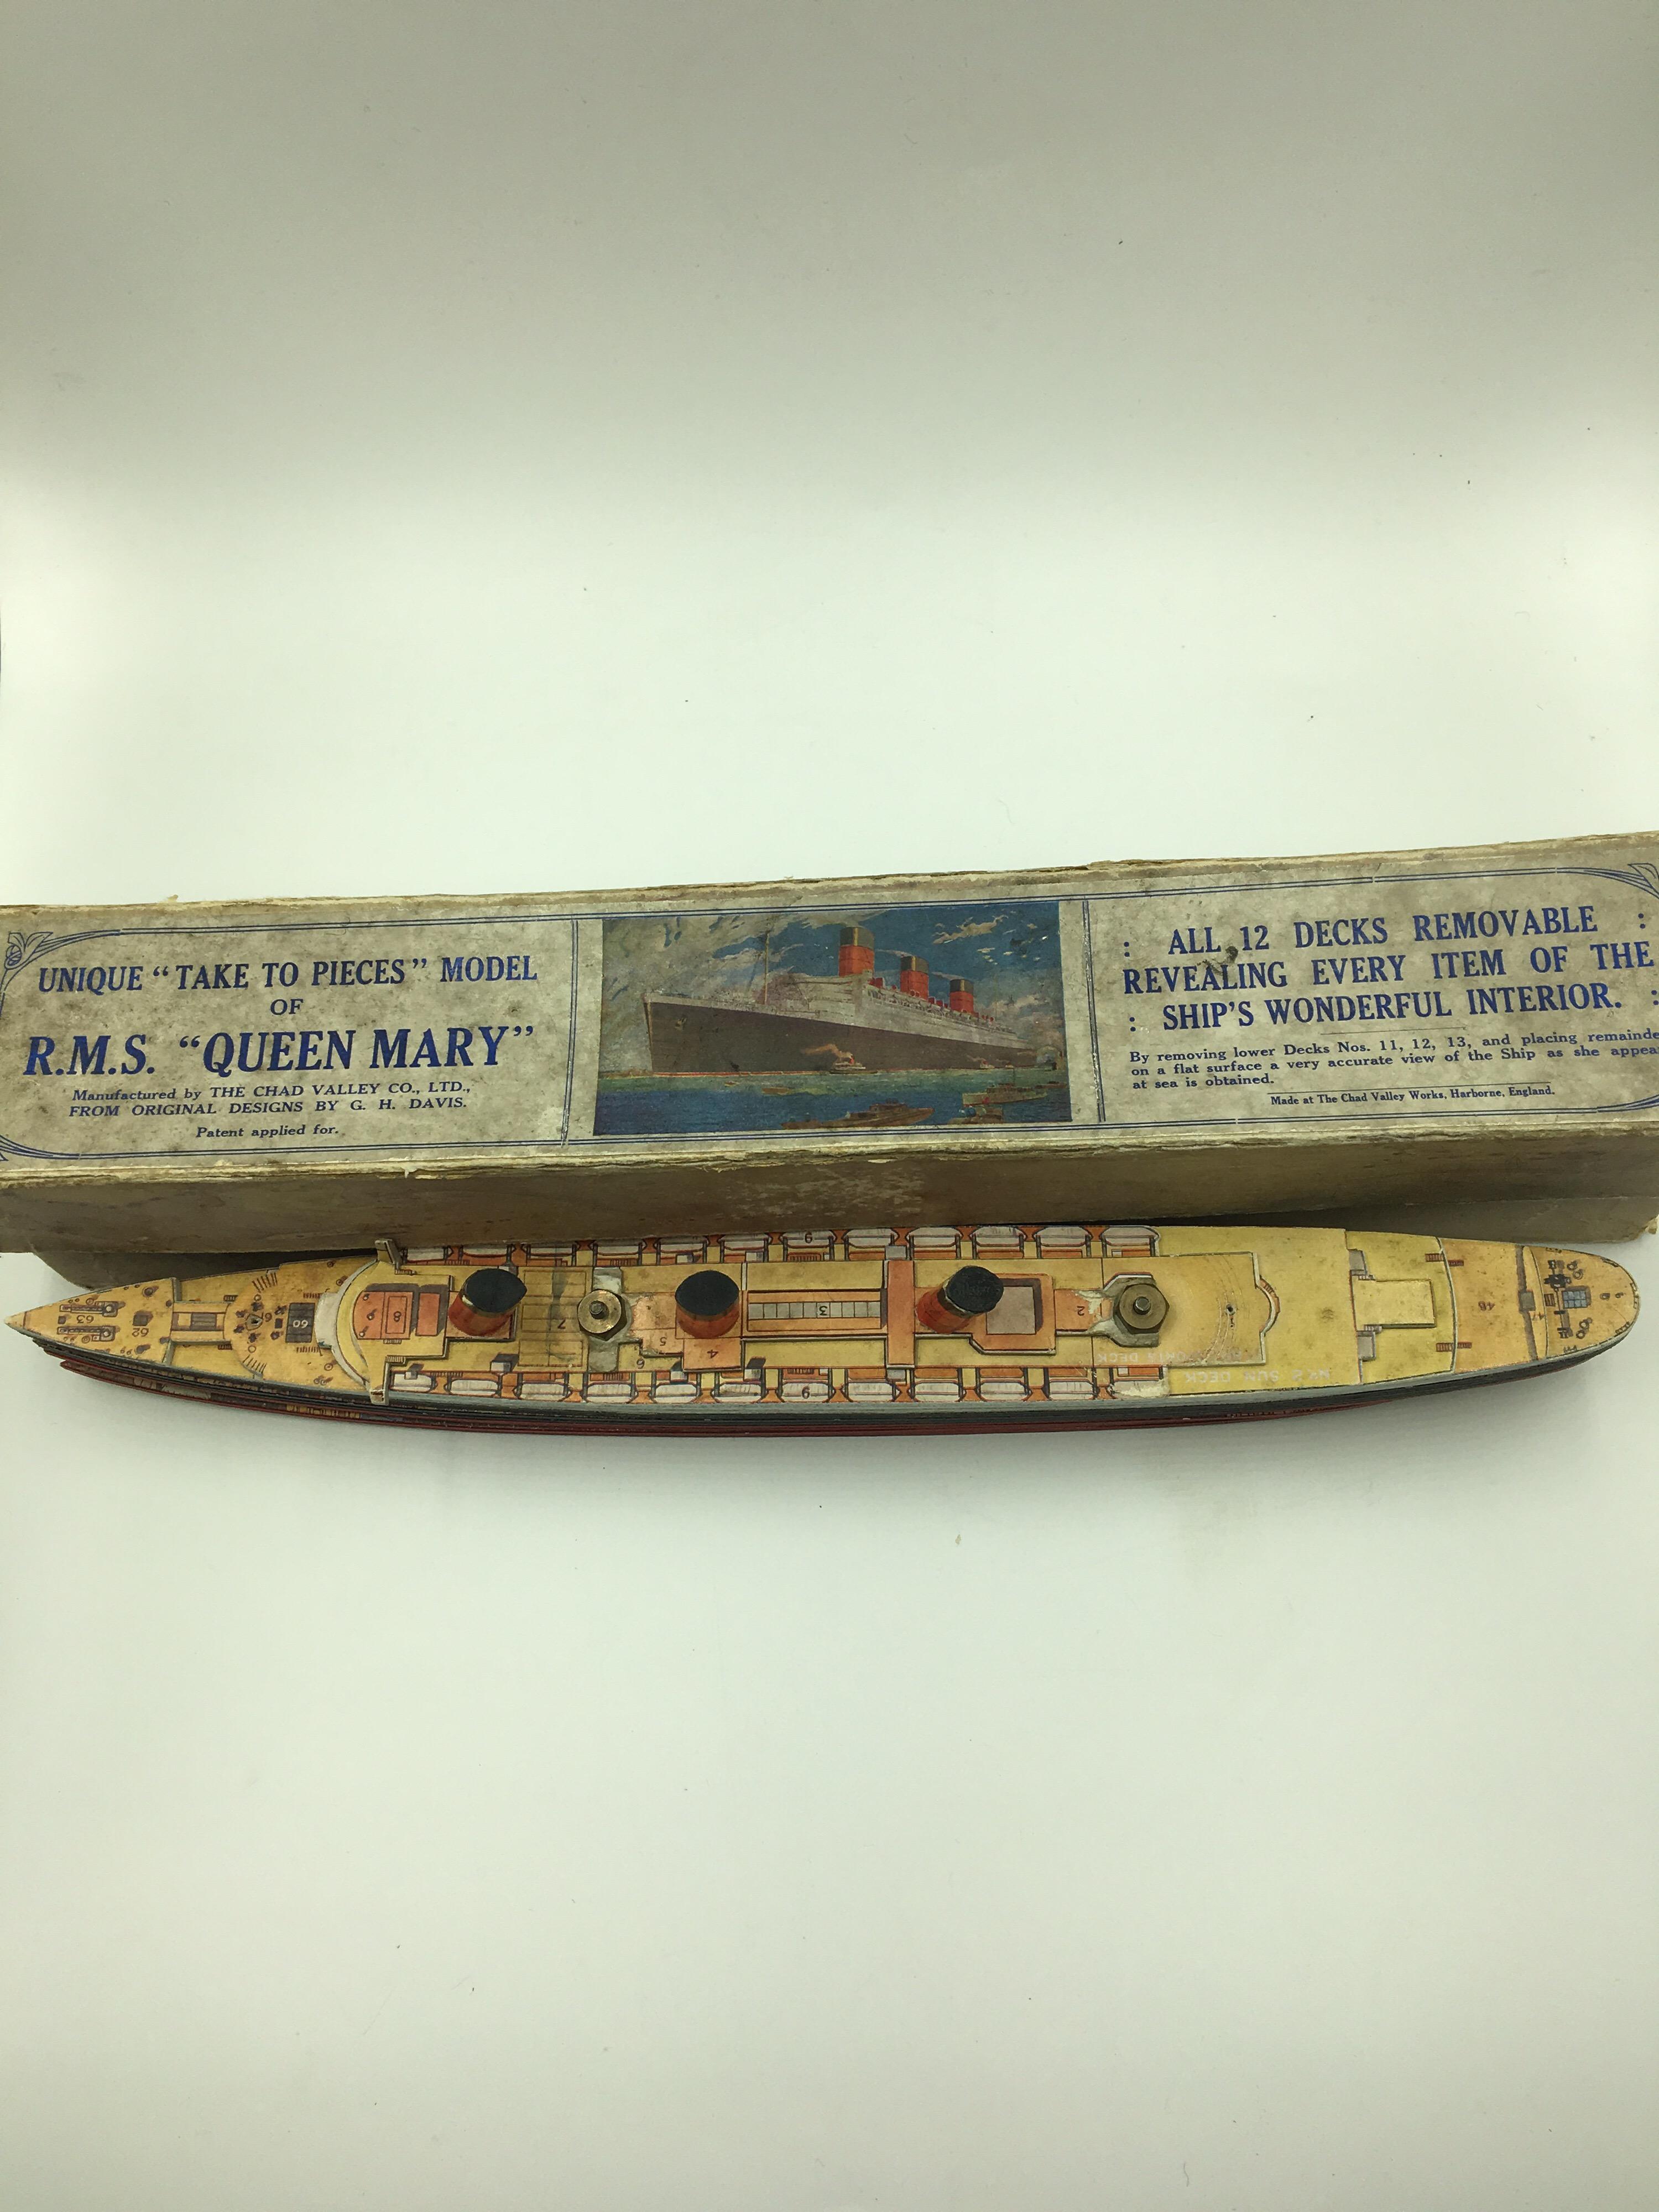 Very rare old 'take to pieces' model of R.M.S. QUEEN MARY.
It dates to 1936 and was made by Chad Valley, Harborne, England.
It features 12 removable decks and it comes in its original box with its original key chart.